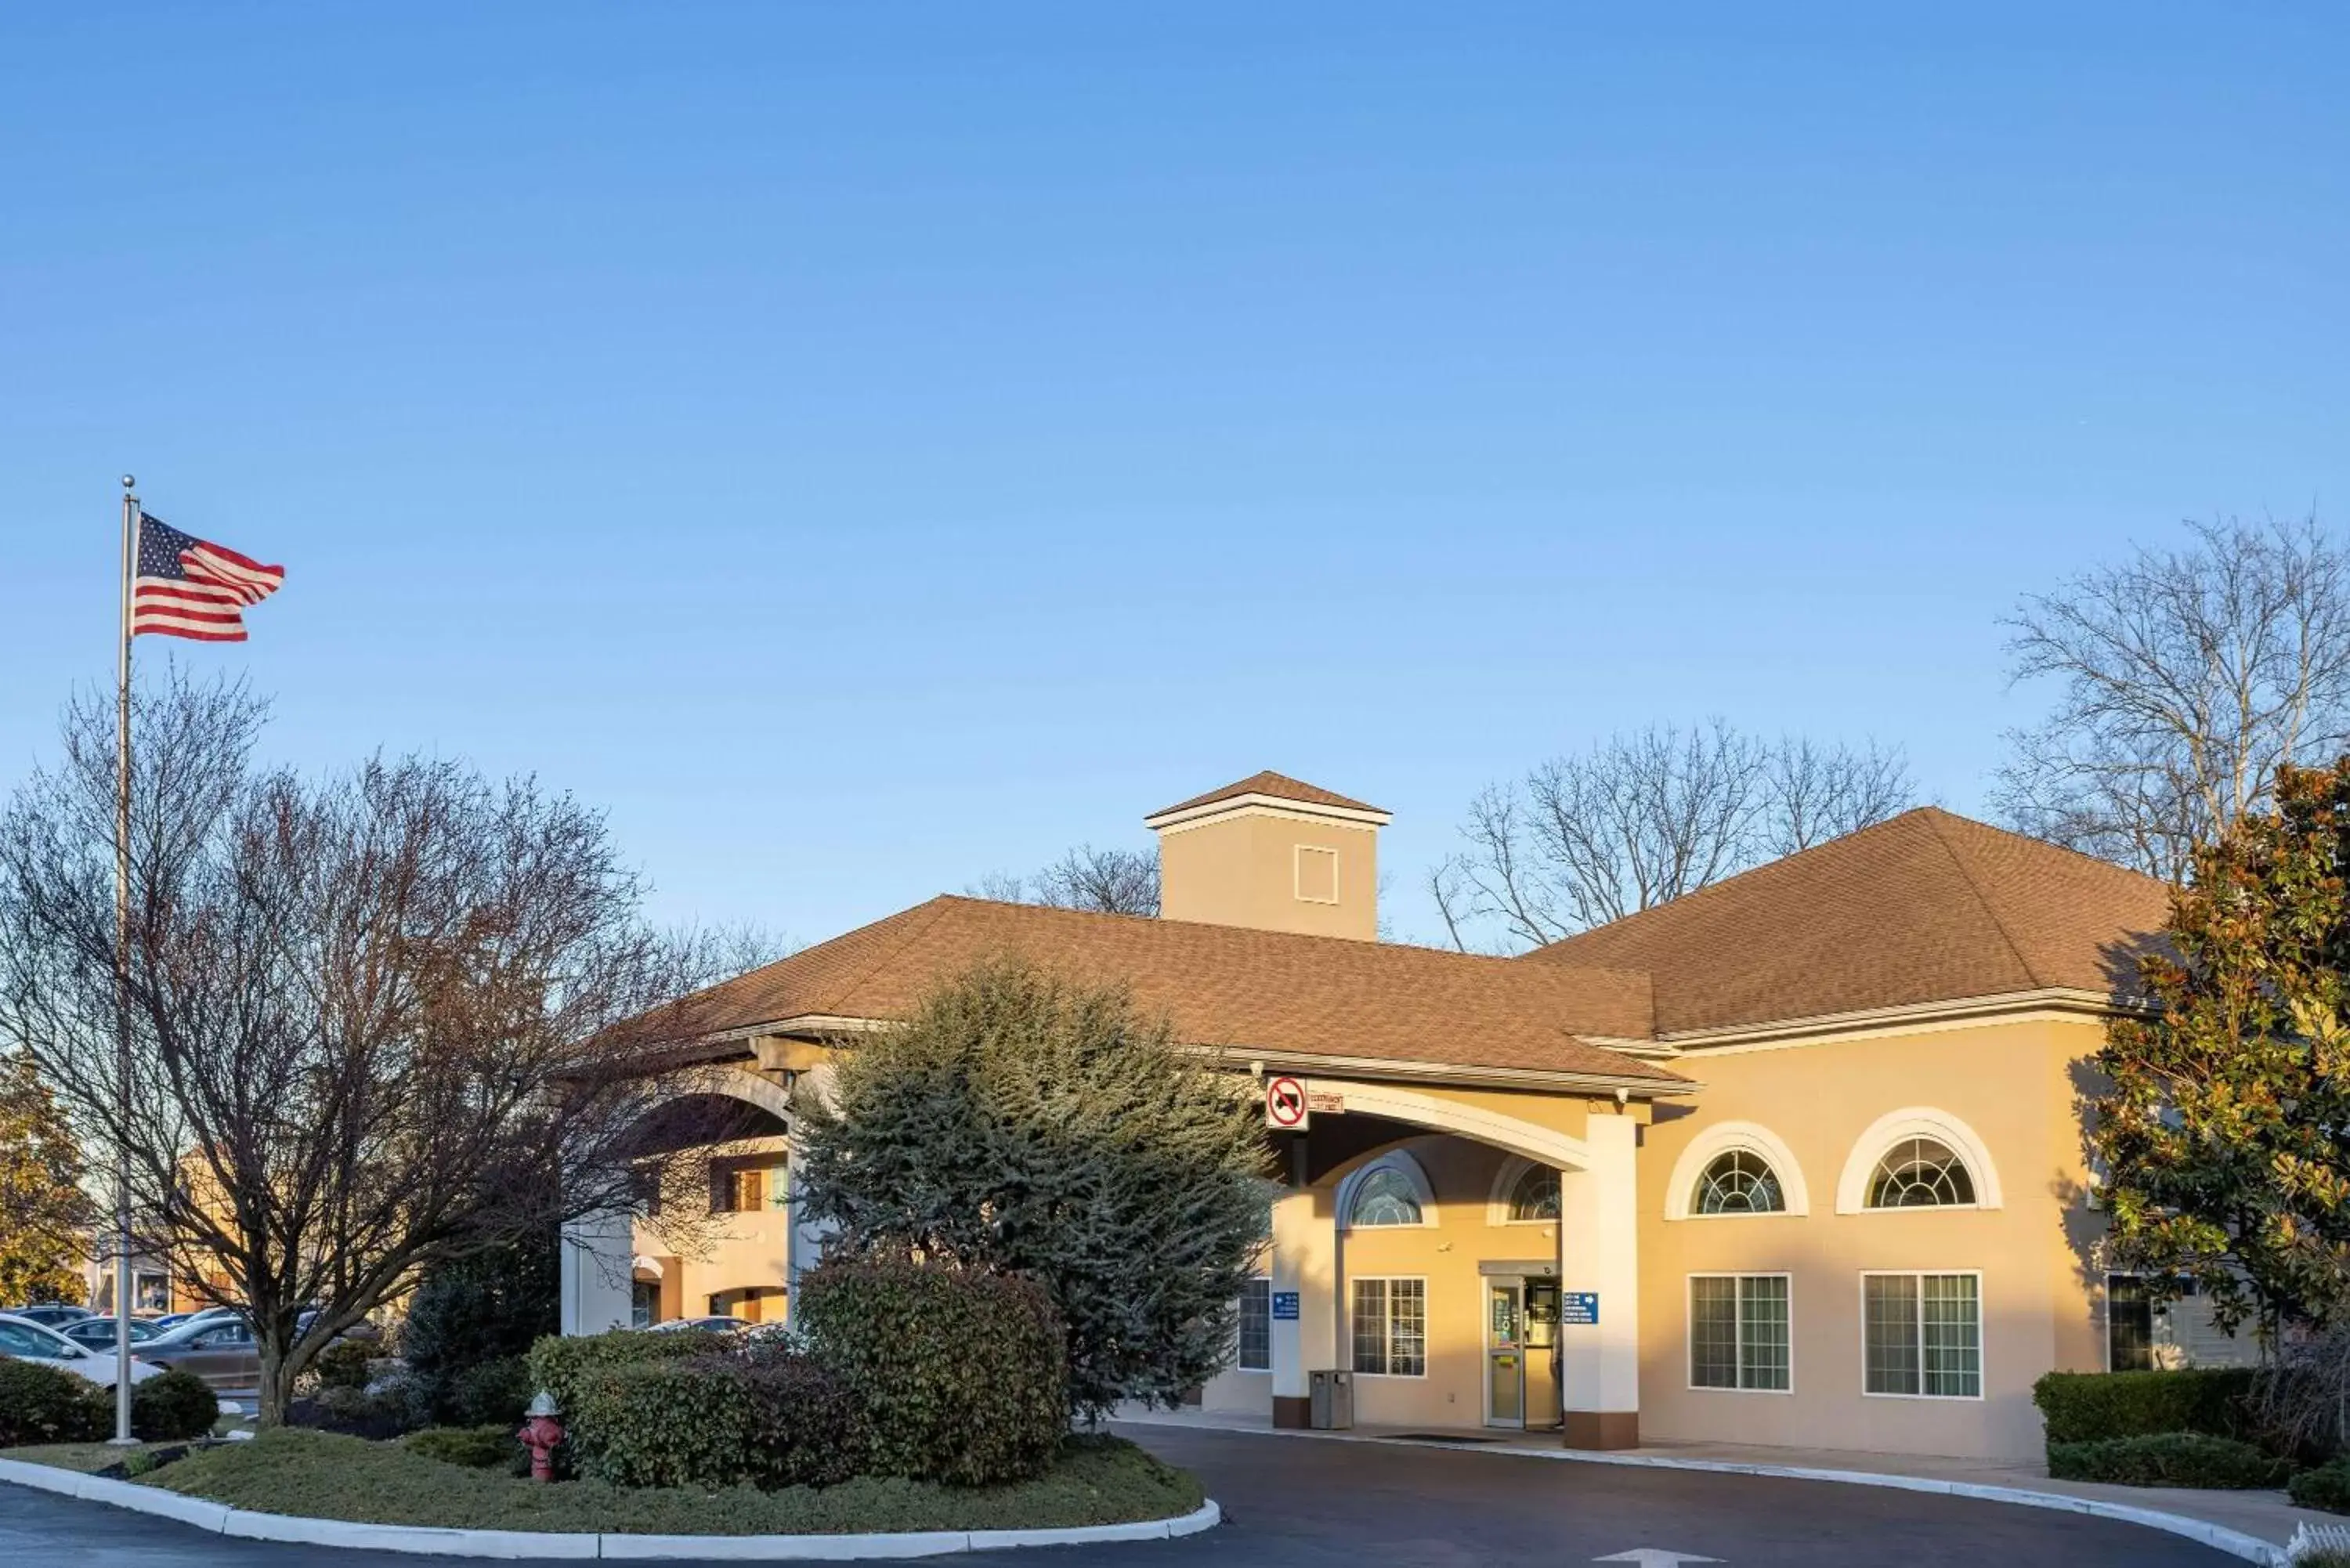 Property Building in Days Inn & Suites by Wyndham Cherry Hill - Philadelphia